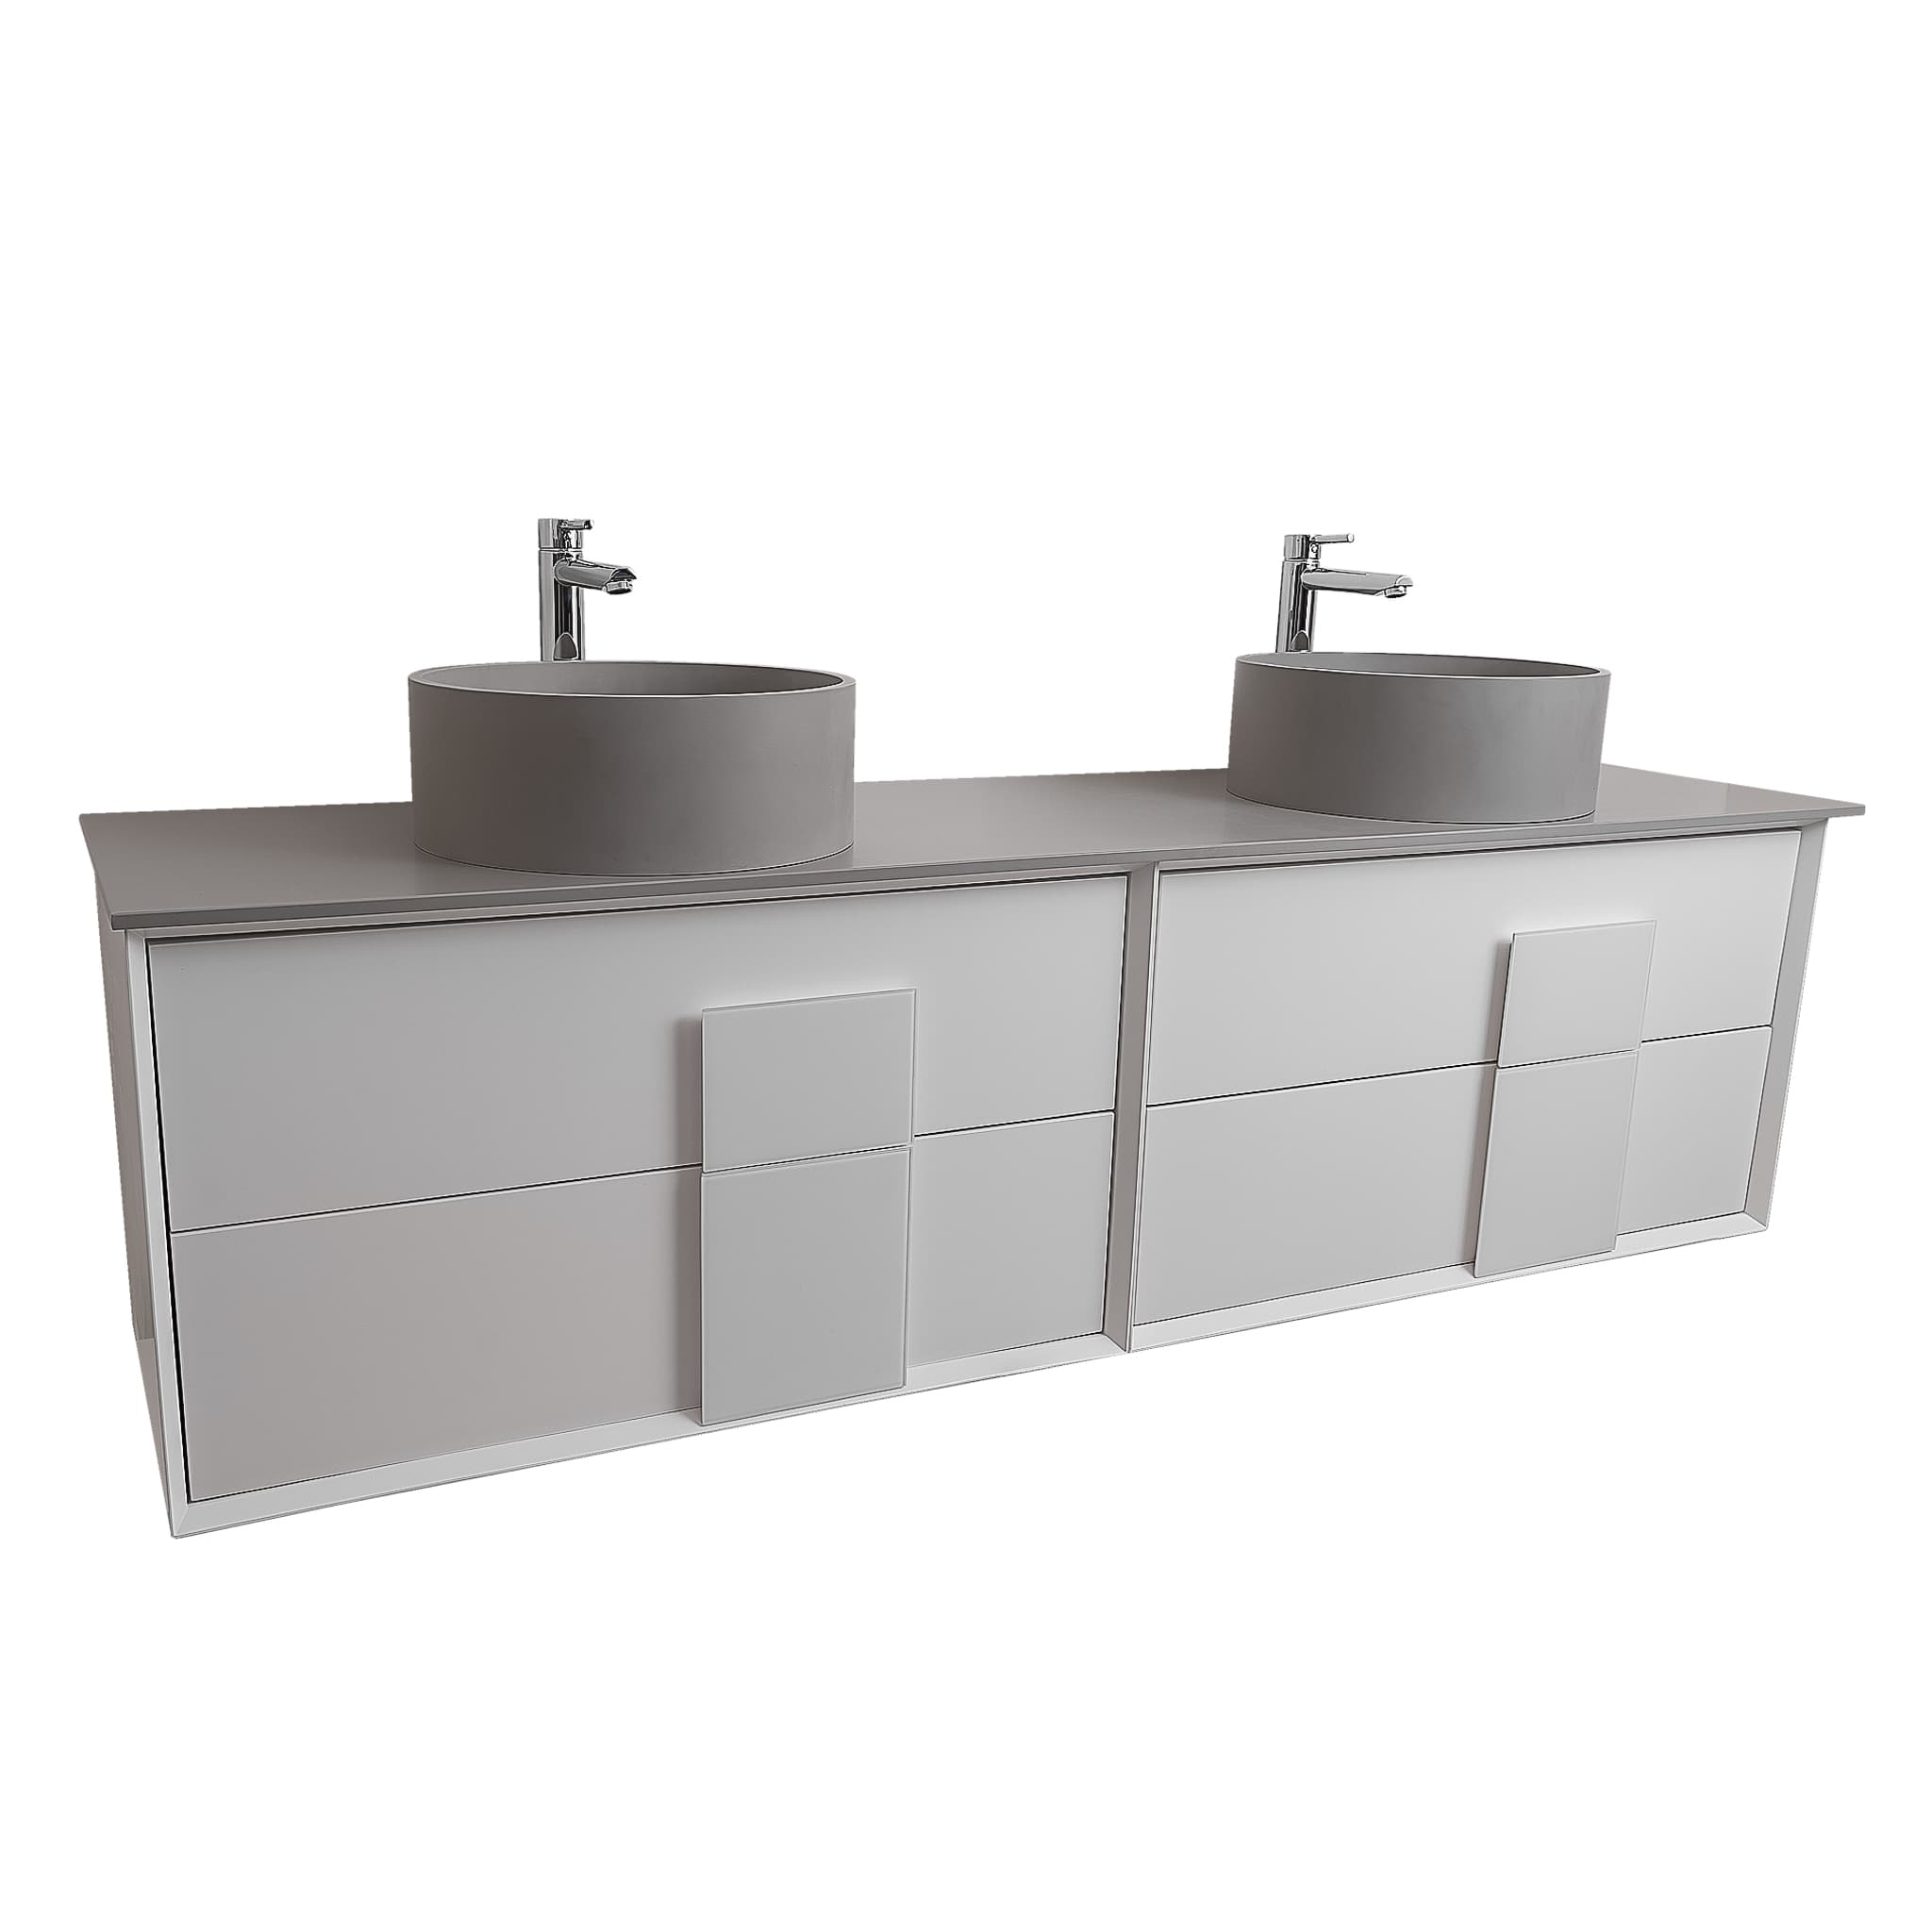 Piazza 63 Matte White With White Handle Cabinet, Solid Surface Flat Grey Counter and Two Round Solid Surface Grey Basin 1386, Wall Mounted Modern Vanity Set